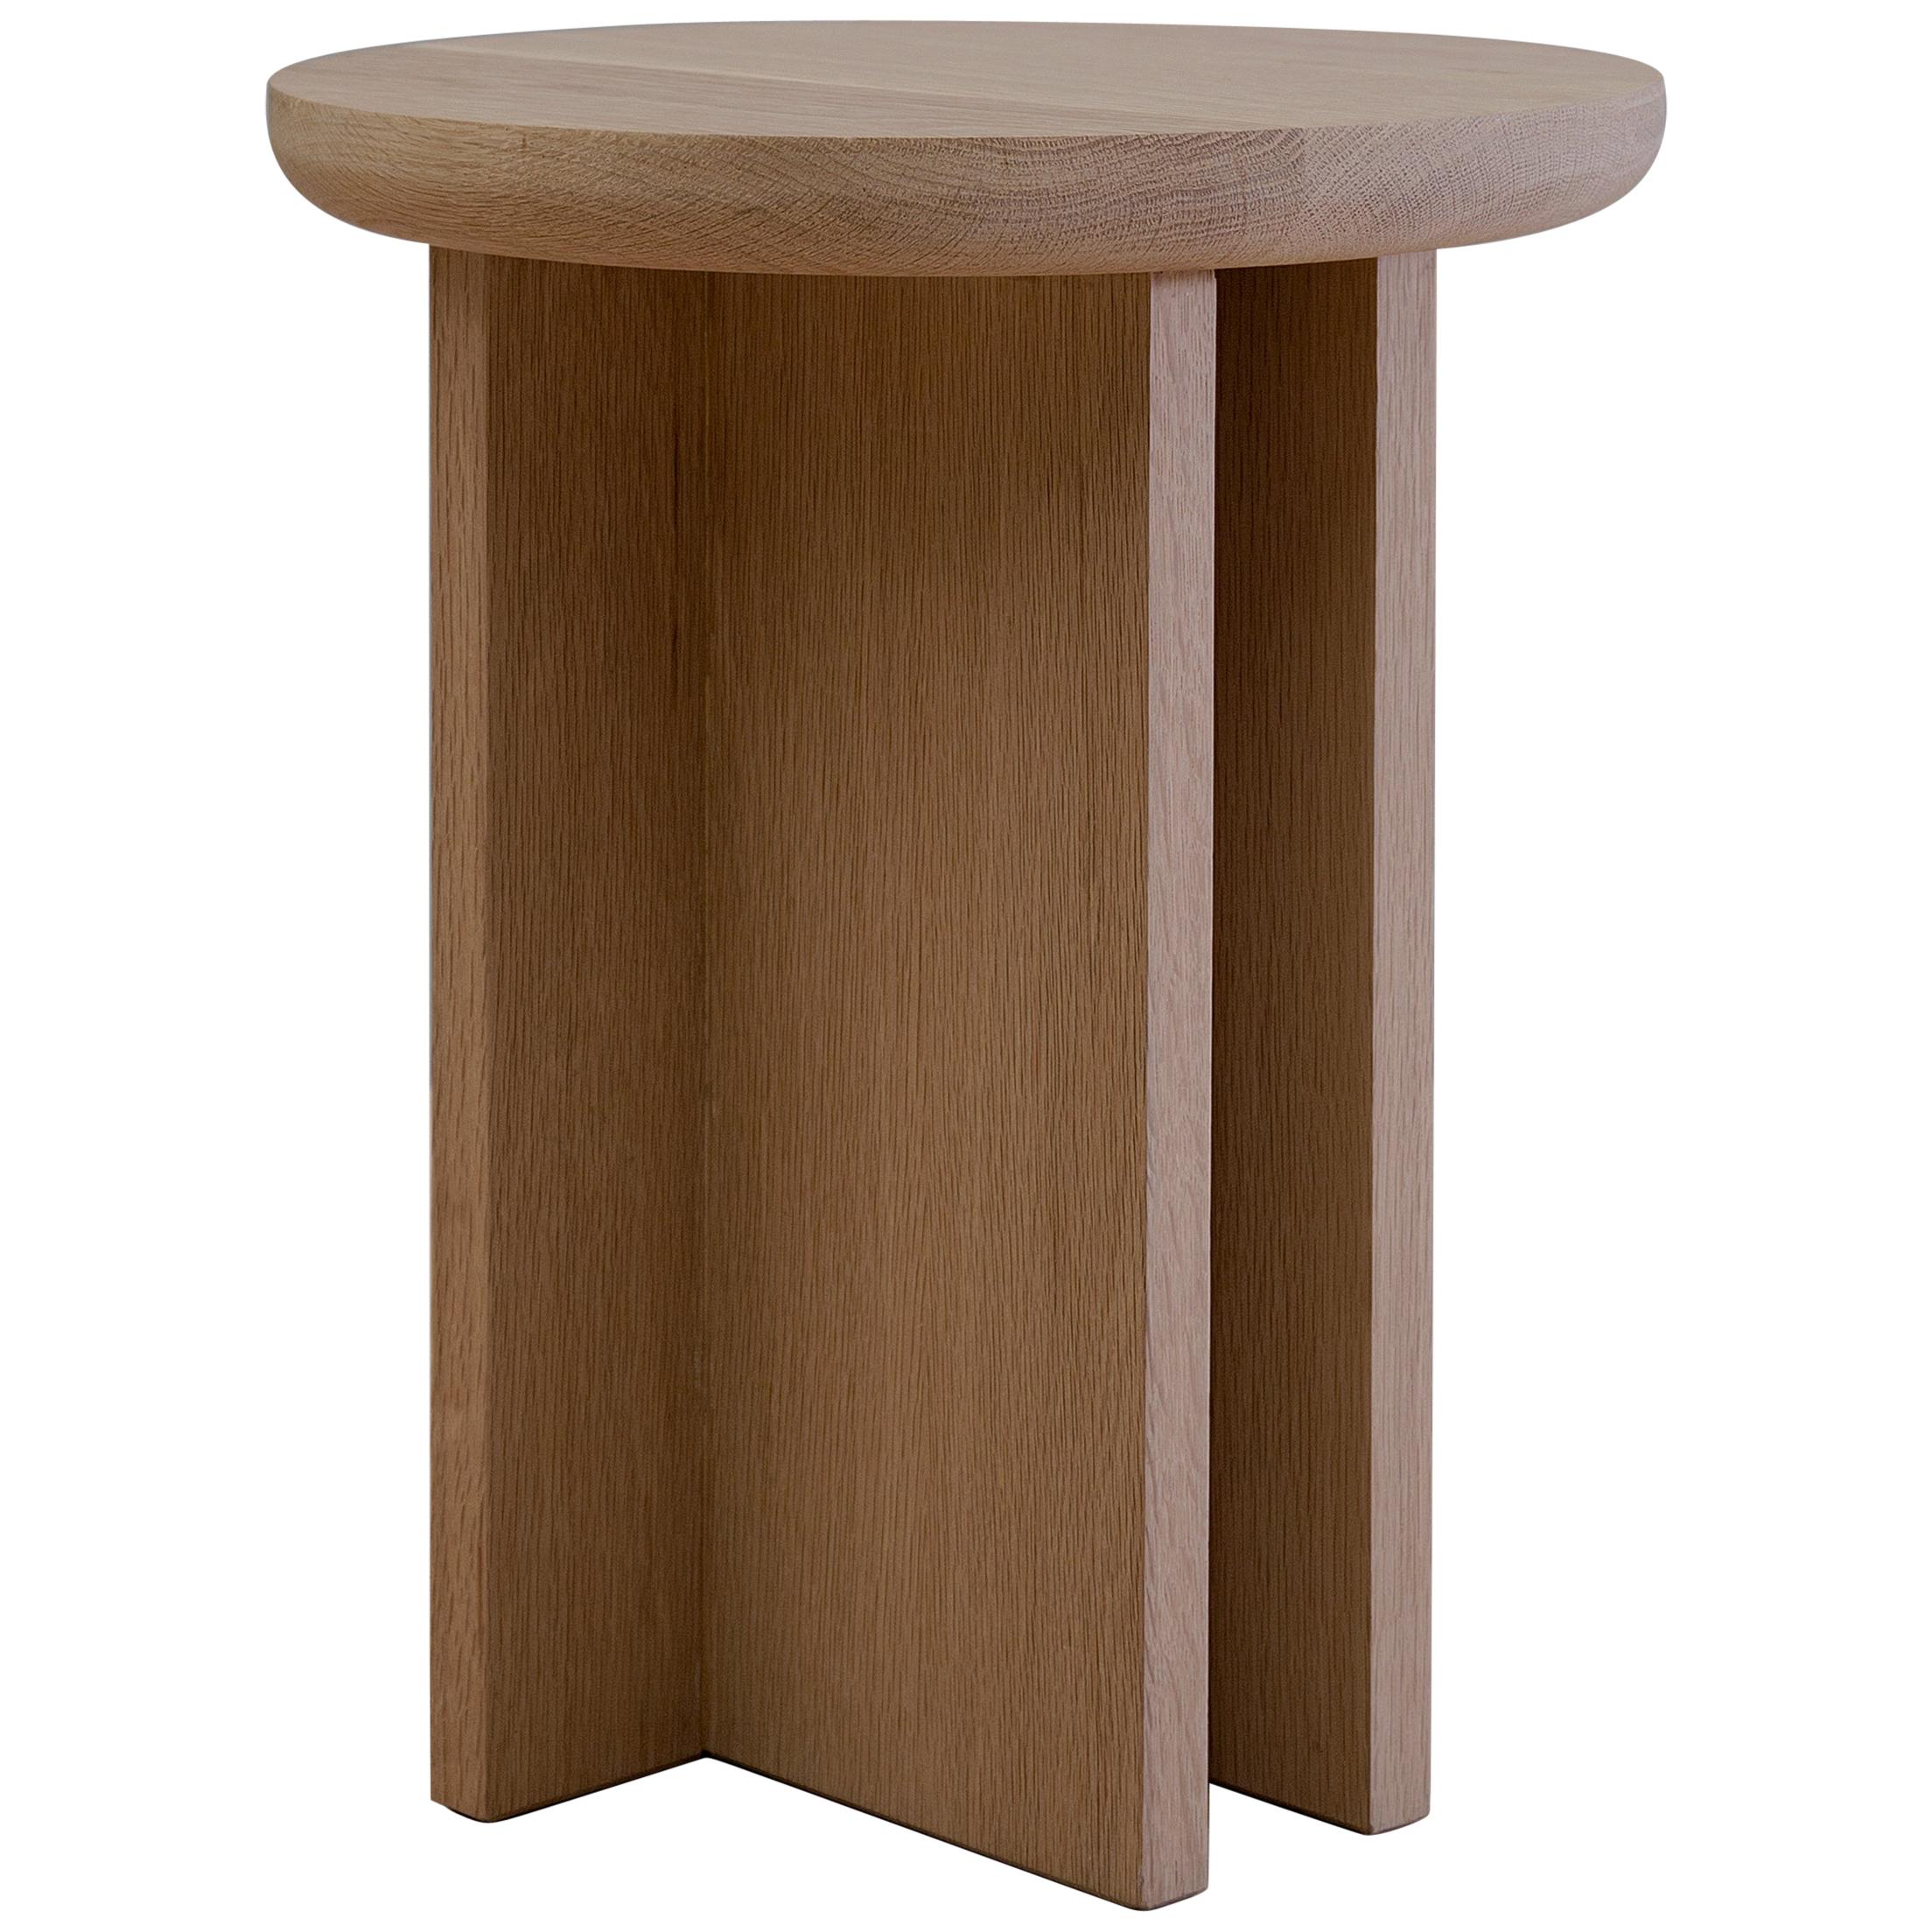 Antropología 03, Sculptural Stool, End Table, Side Table Made of Solid Oak Wood